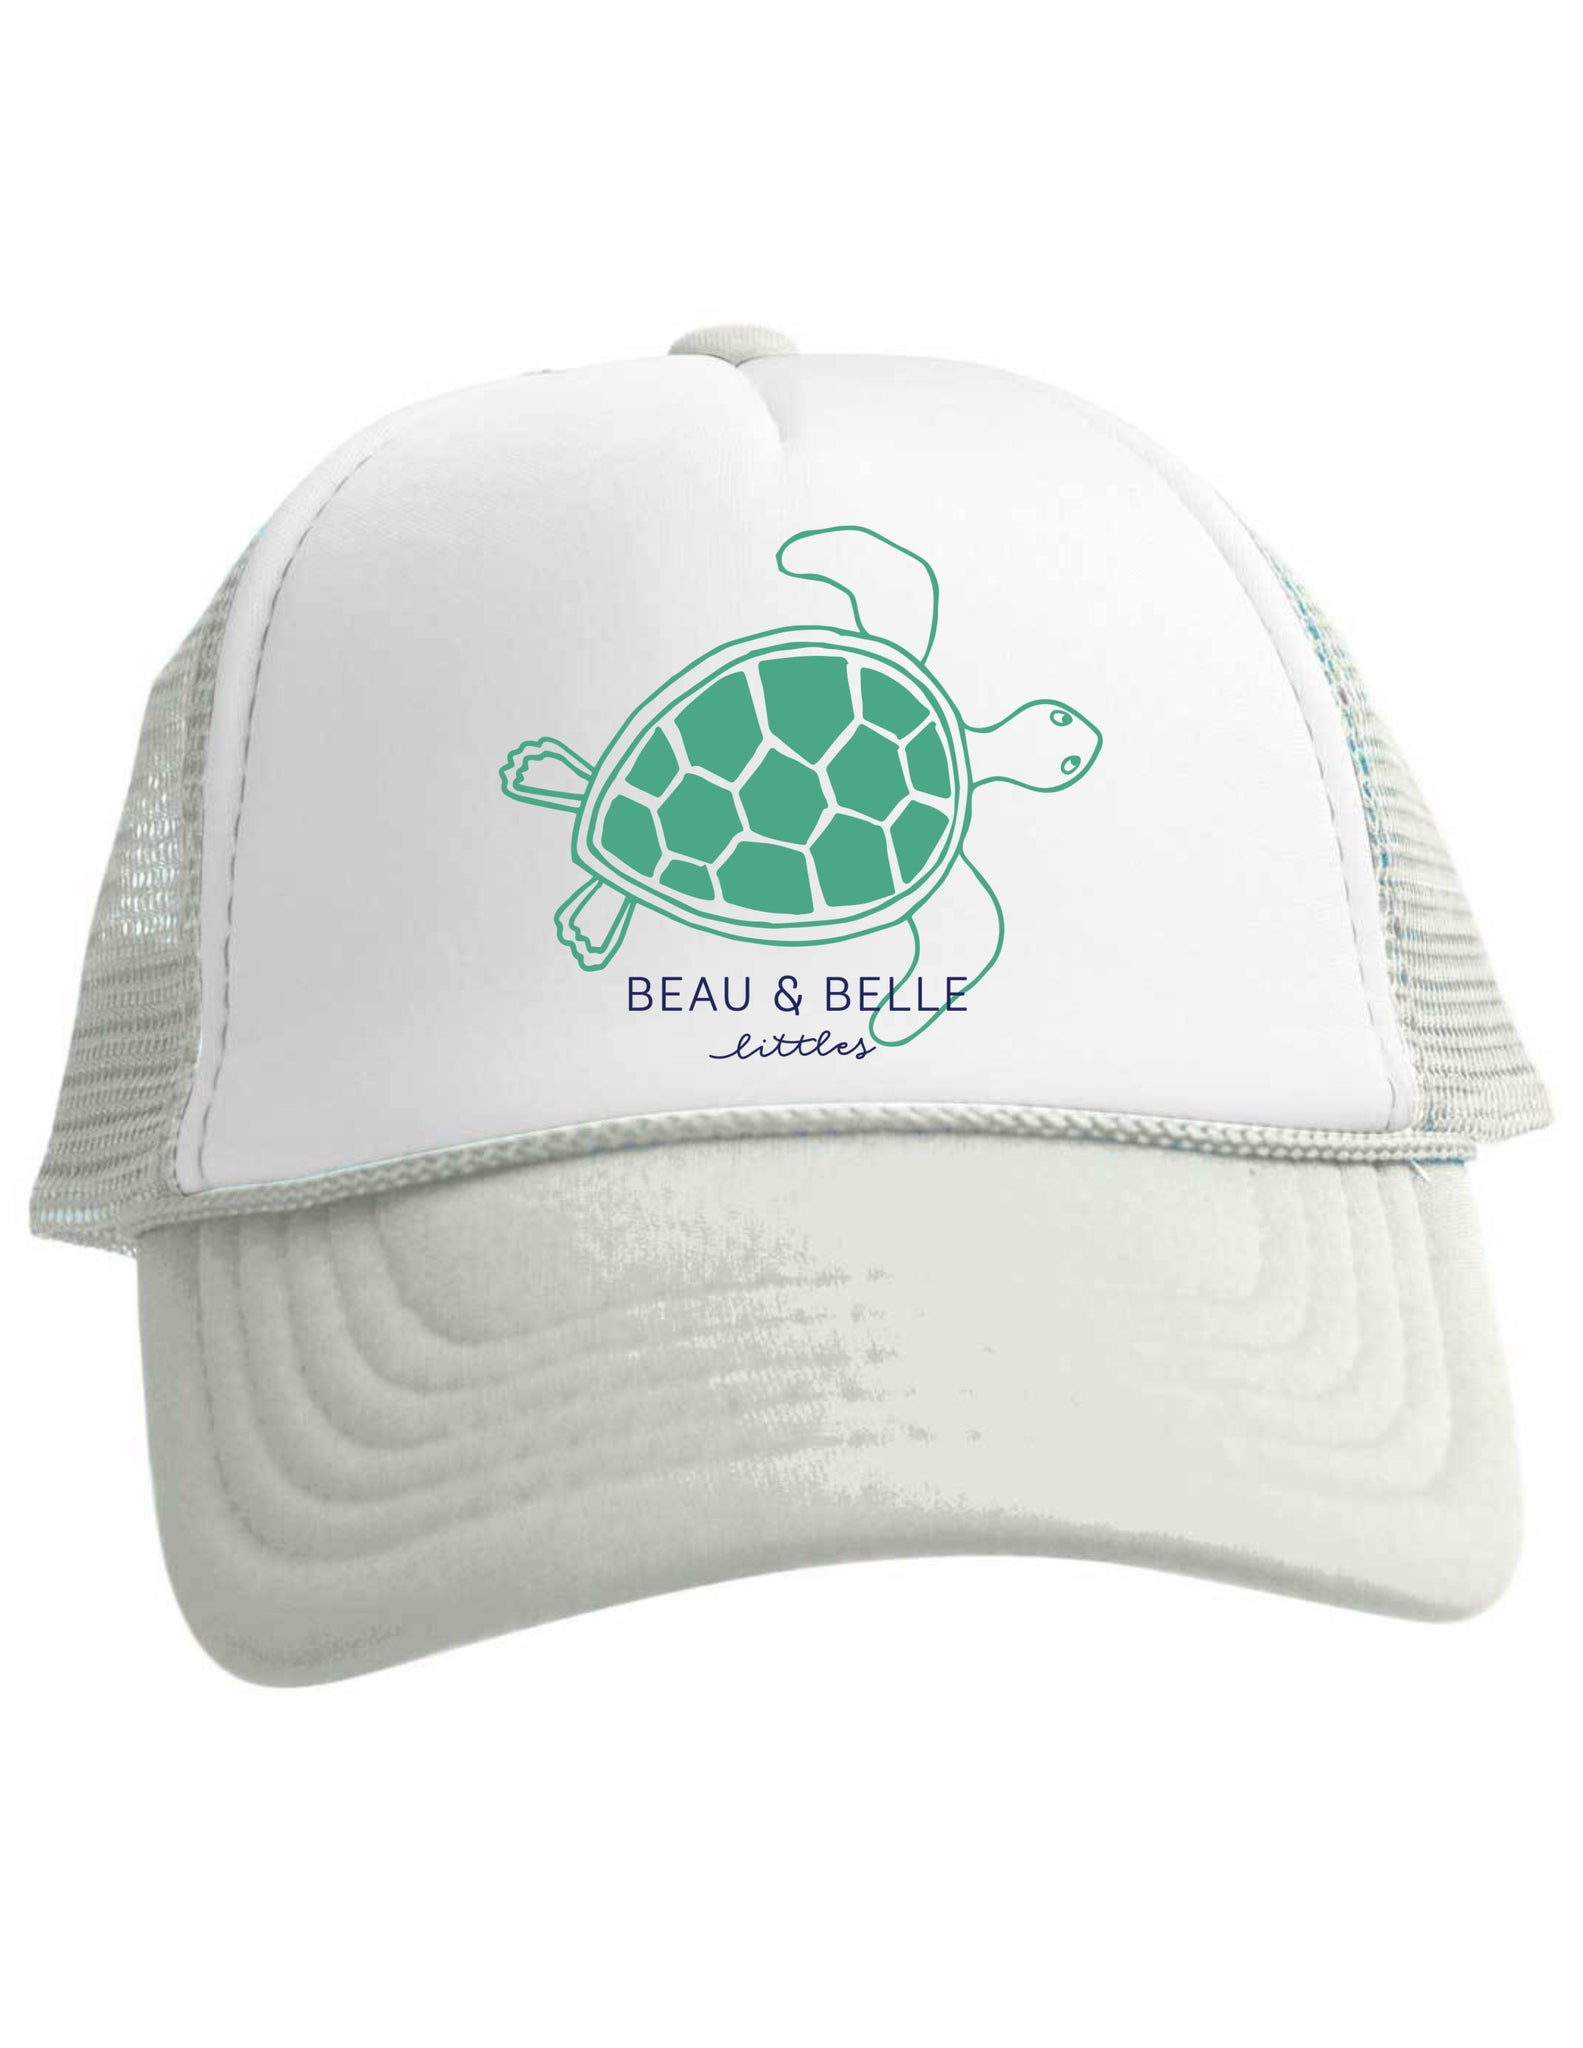 Beau and Belle Littles Sea Turtle Trucker Hat Baby Toddler Adult Sizes